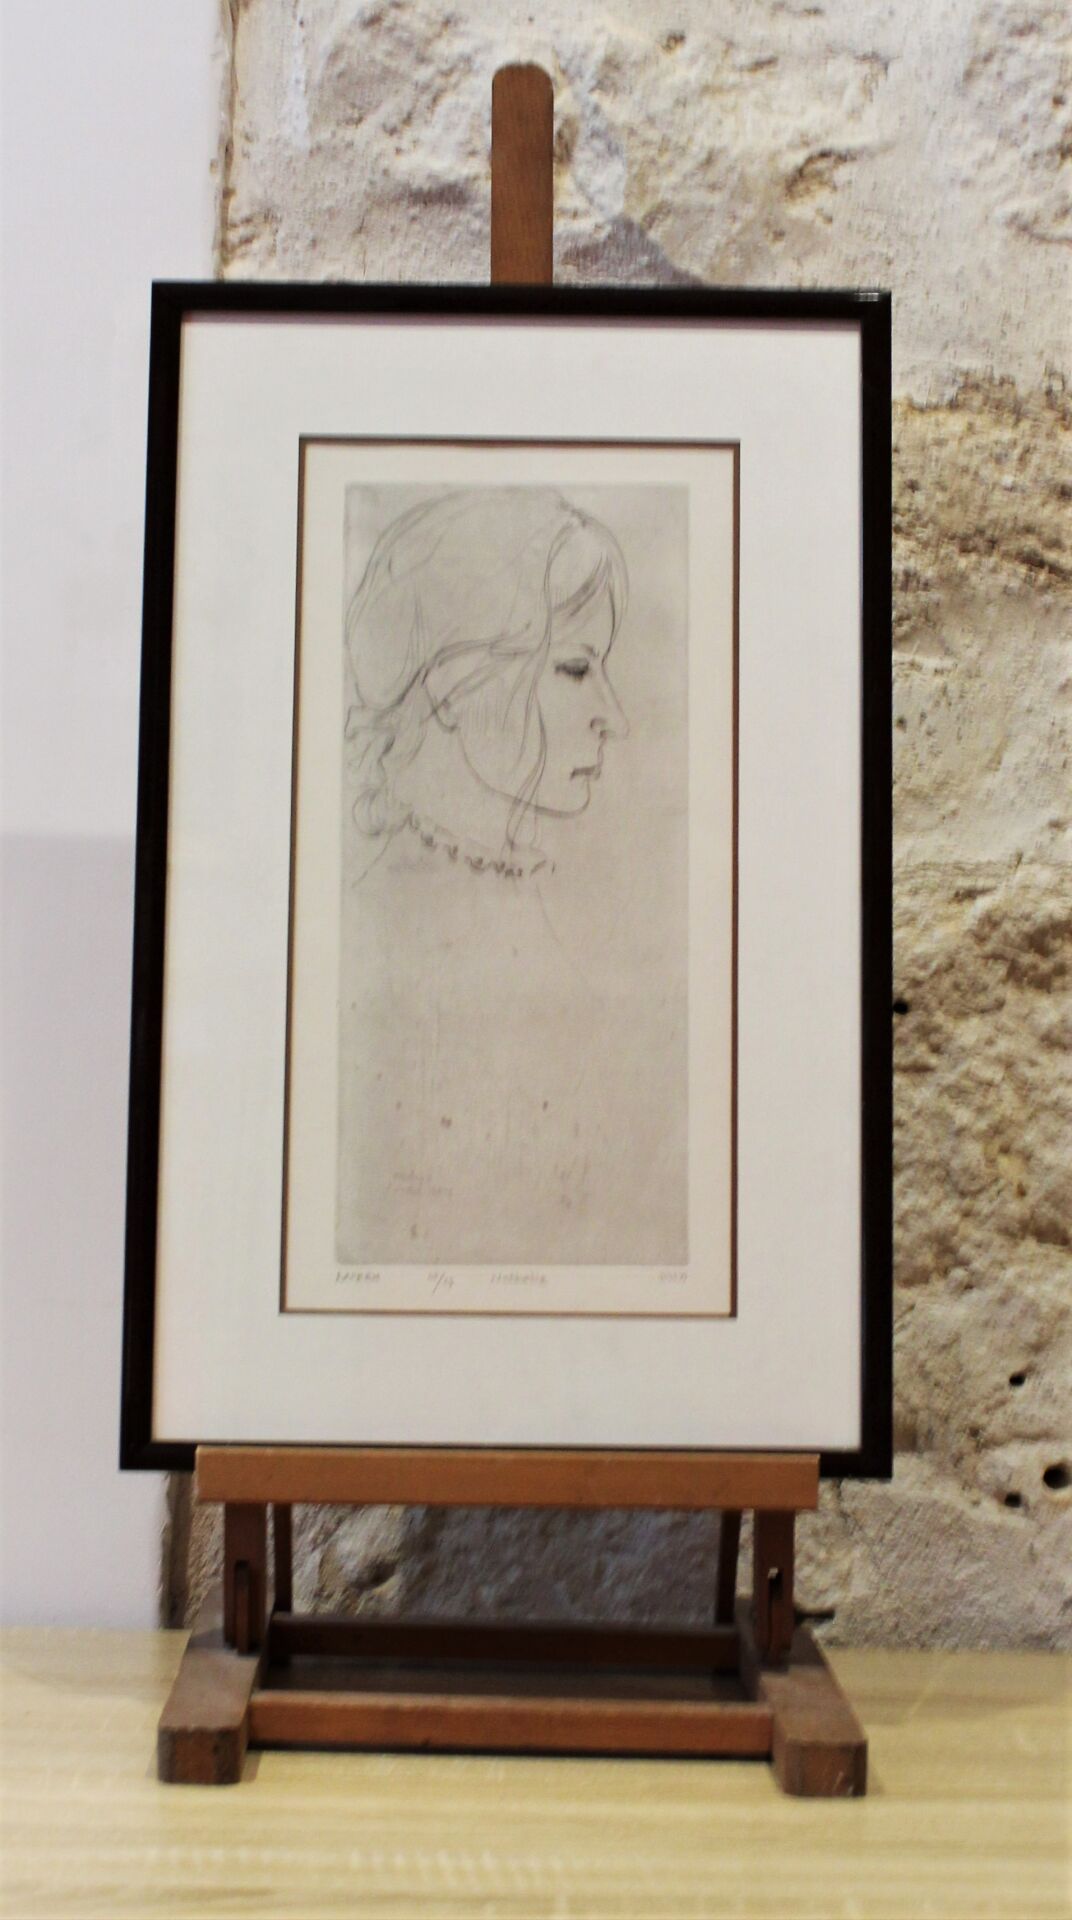 Null MOREH "Nathalie" n°25/25

Lithography. Sight size : 39 x 19,5 cm 

A print &hellip;